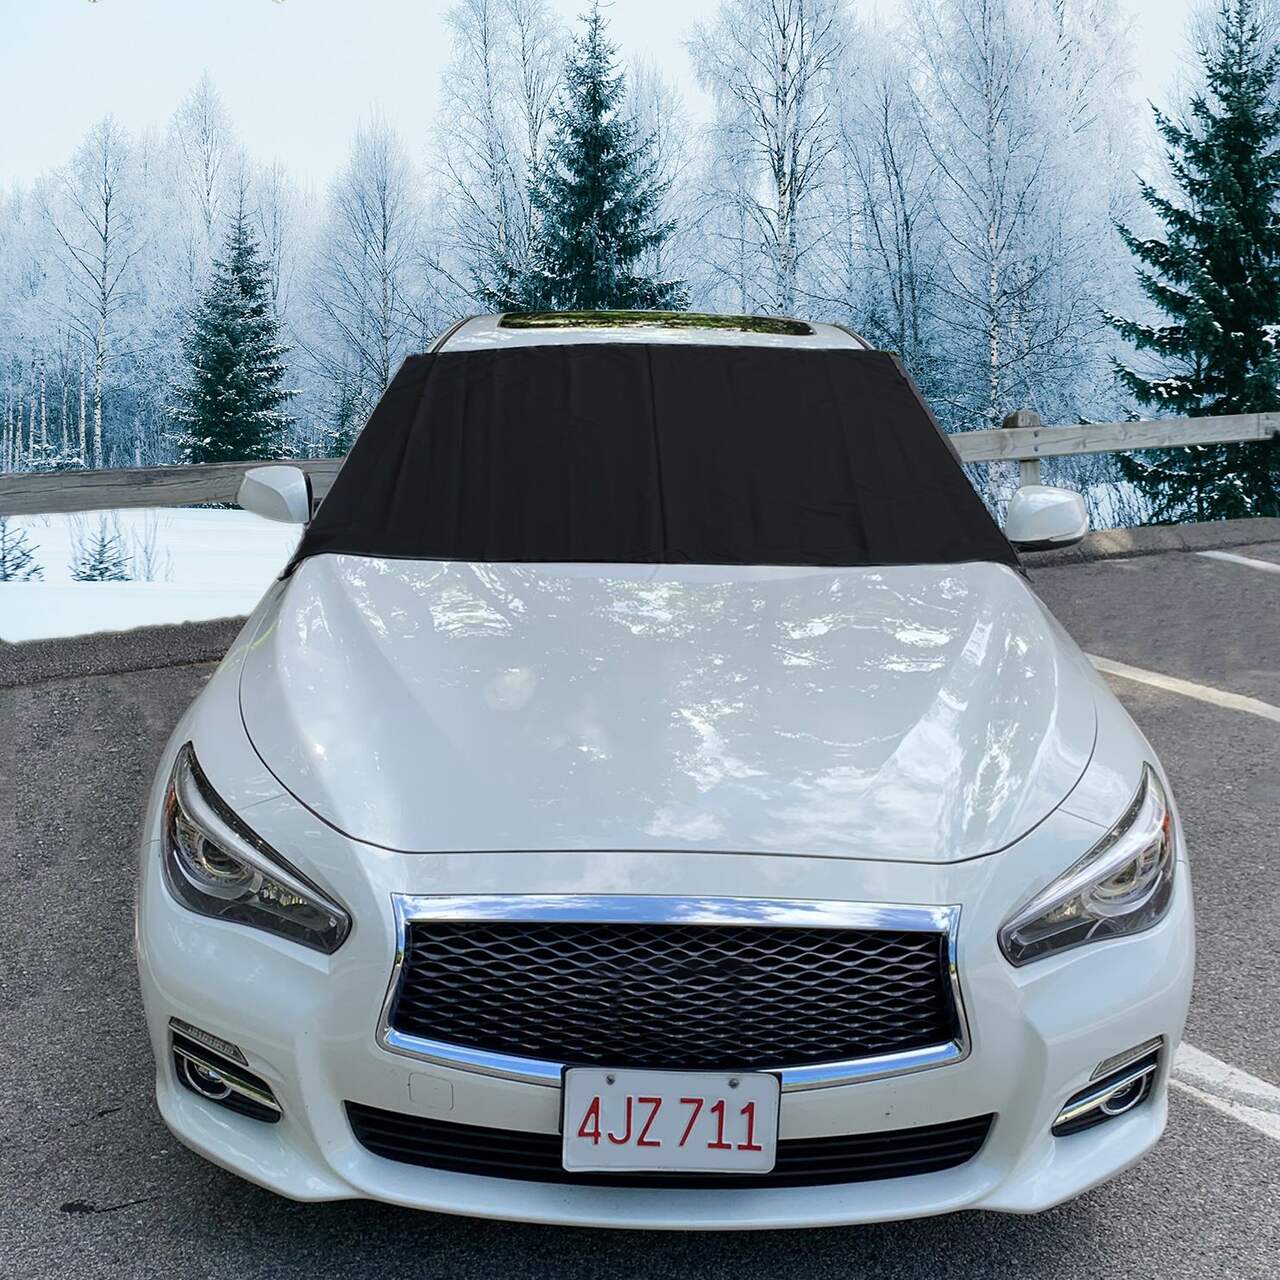 MyRide 2-in-1 Sun & Snow Windshield Cover, fits most vehicles